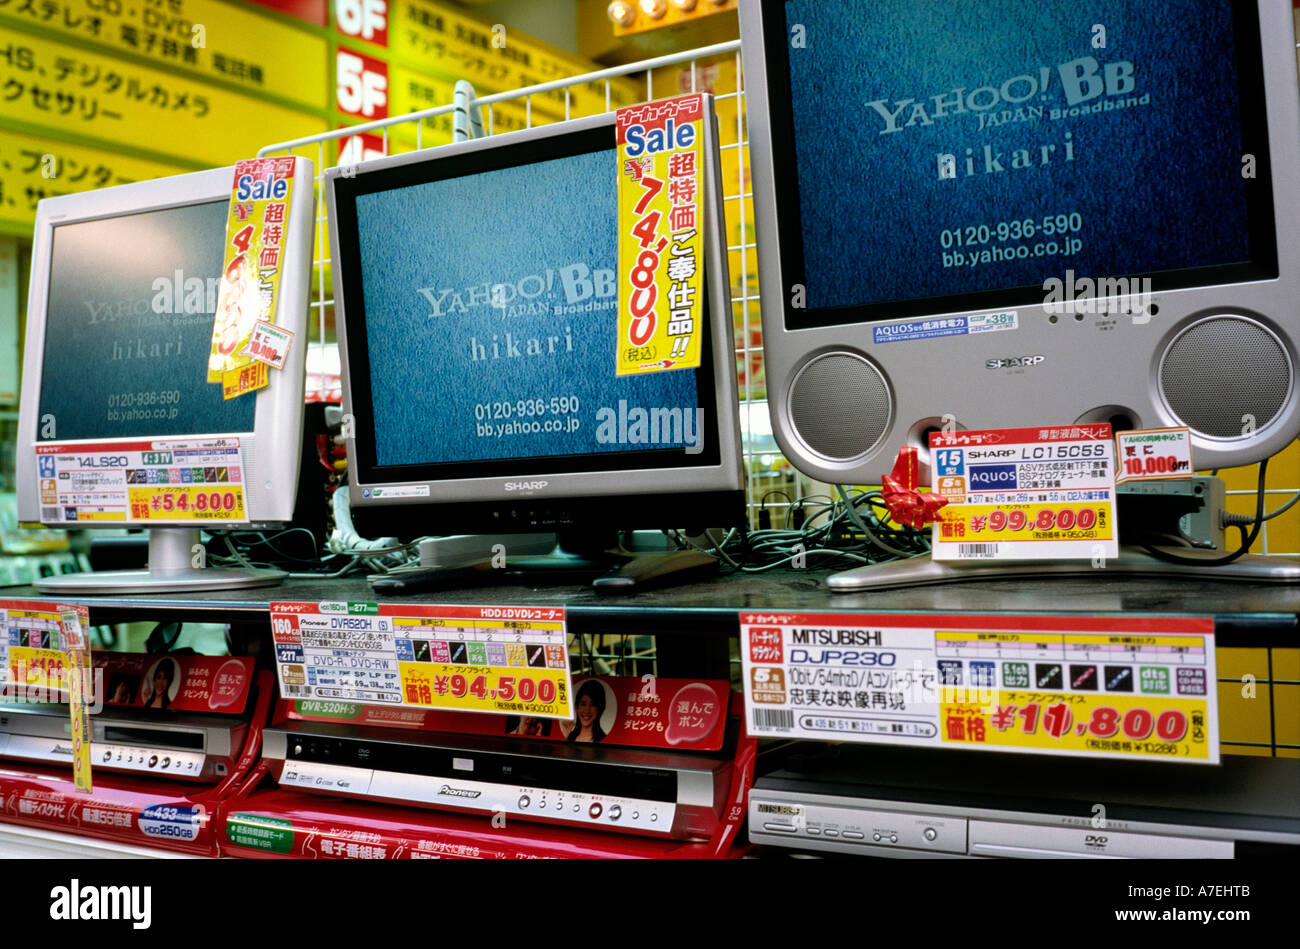 Nov 09, 2004 - Consumer electronics on sale at Akihabara (Electric Town) in Tokyo Stock Photo